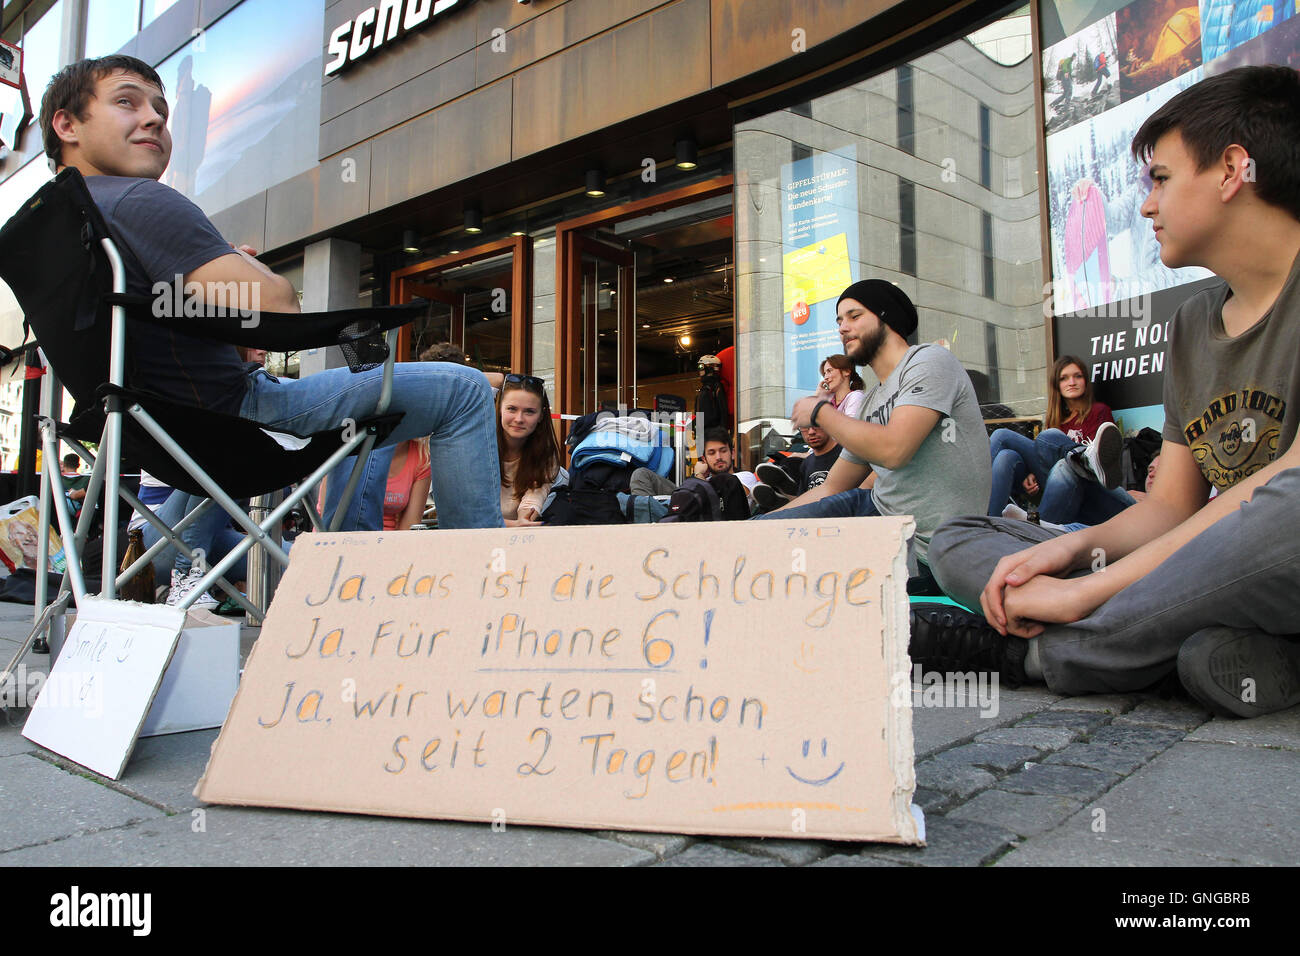 Waiting for the iPhone 6 in Munich, 2014 Stock Photo